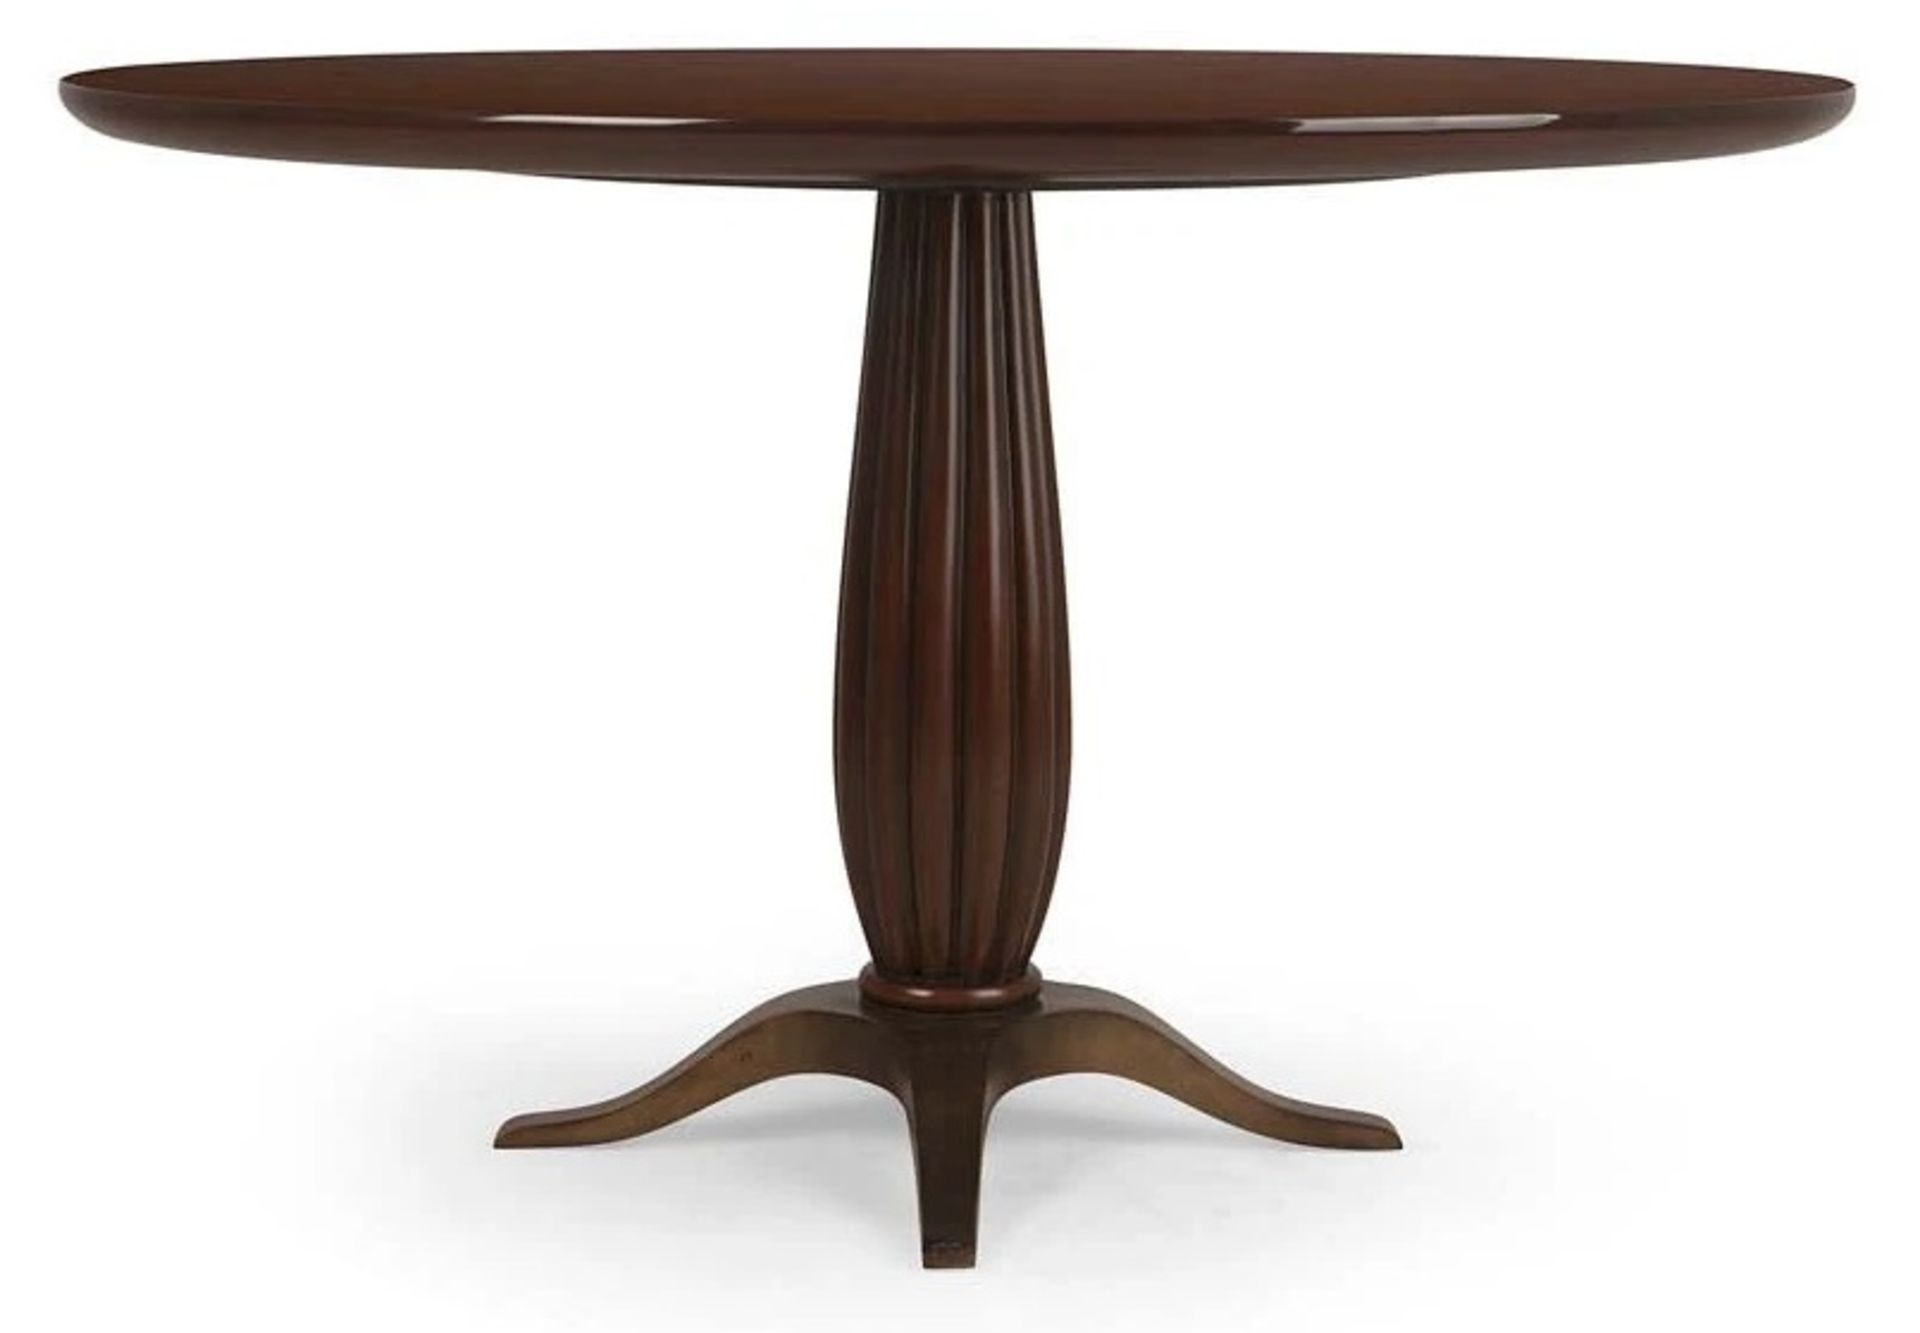 1 x Christopher Guy 'Toulouse' Round Georgian-Style Restaurant Dining Table - Original RRP £4,600.00 - Image 6 of 9